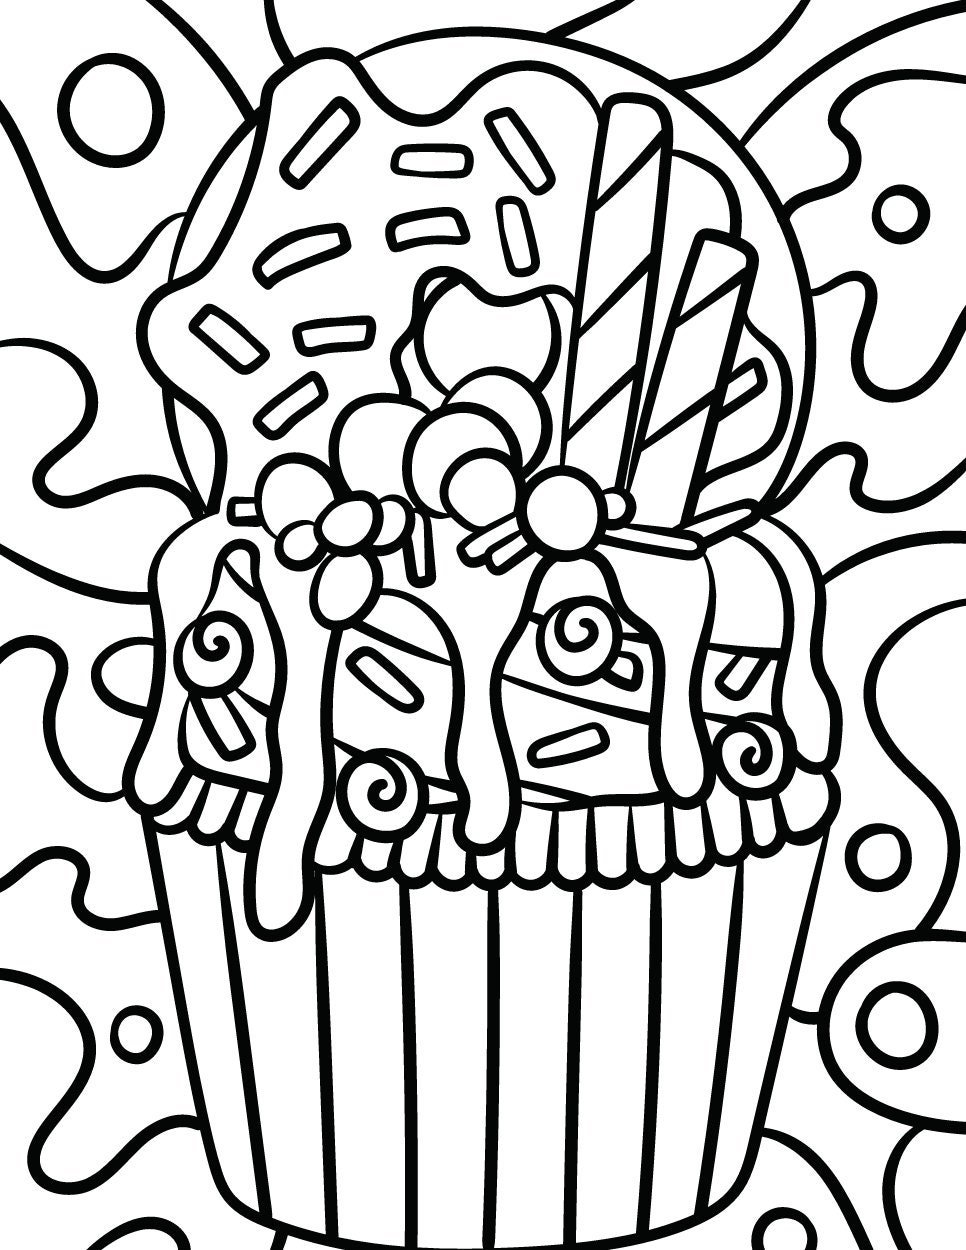 Delicious Desserts coloring book: Cupcake, Candy and cute stuff